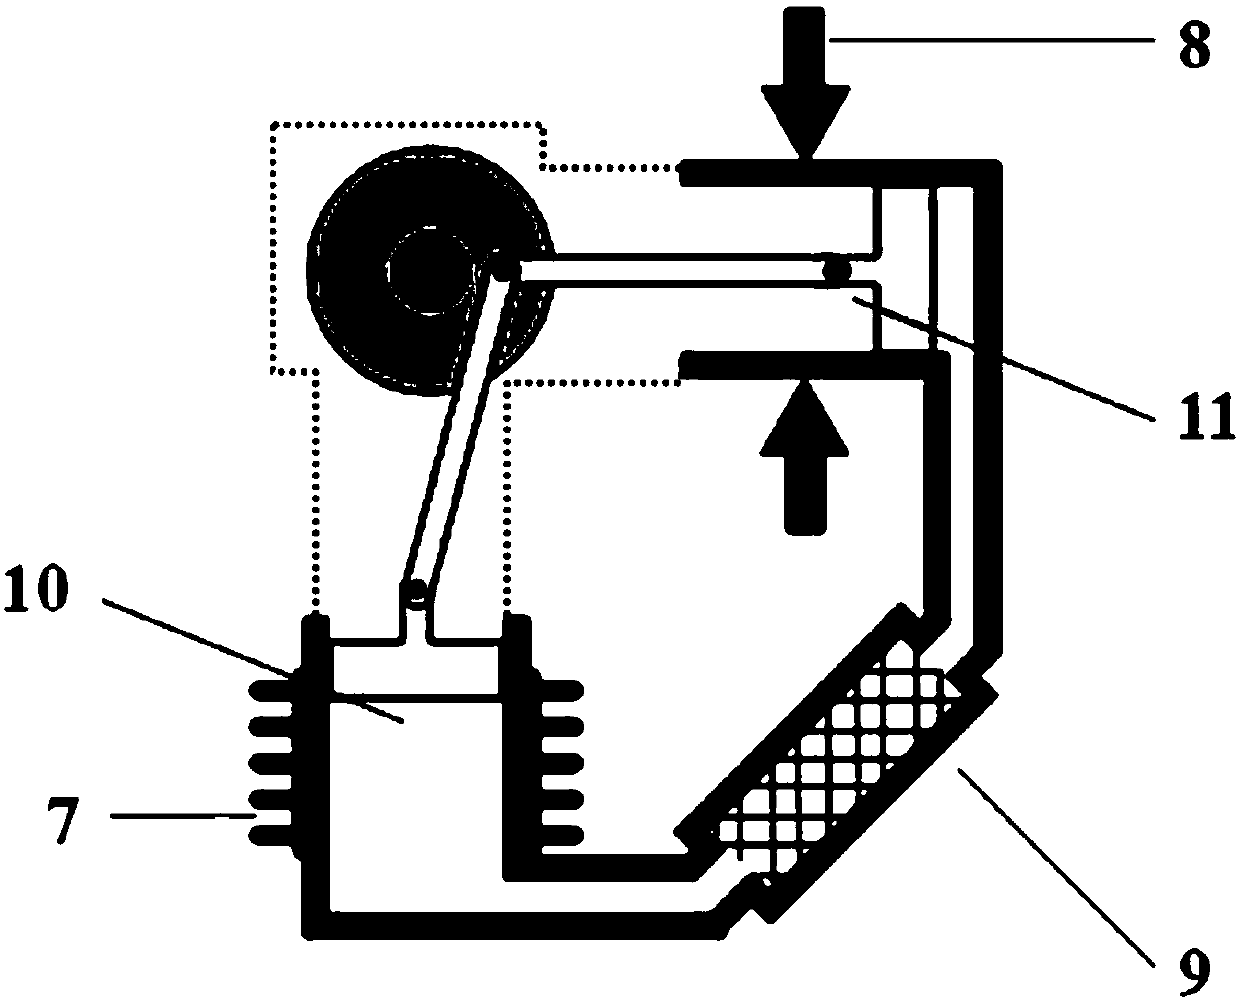 Heat regenerator based on phase change materials and stirling cycle system